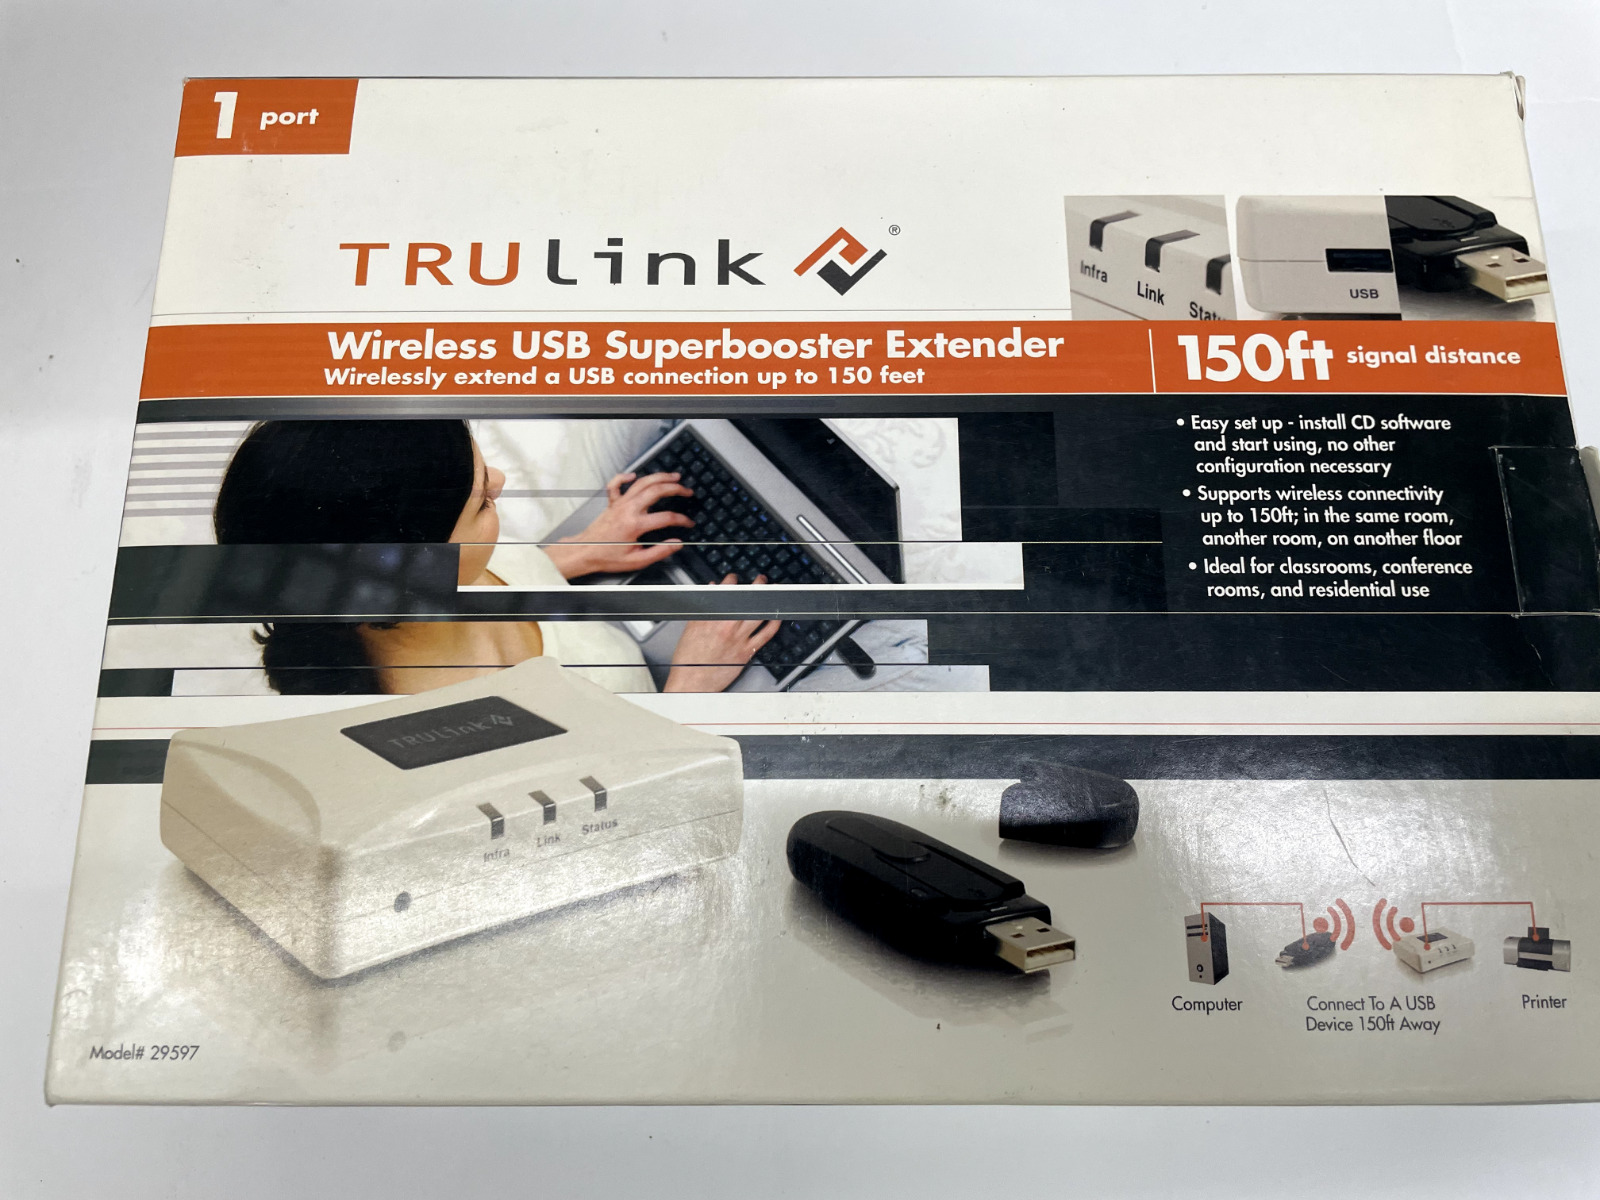 C2G/ Cables to Go Trulink 29597 Wireless USB Superbooster Extender Kit